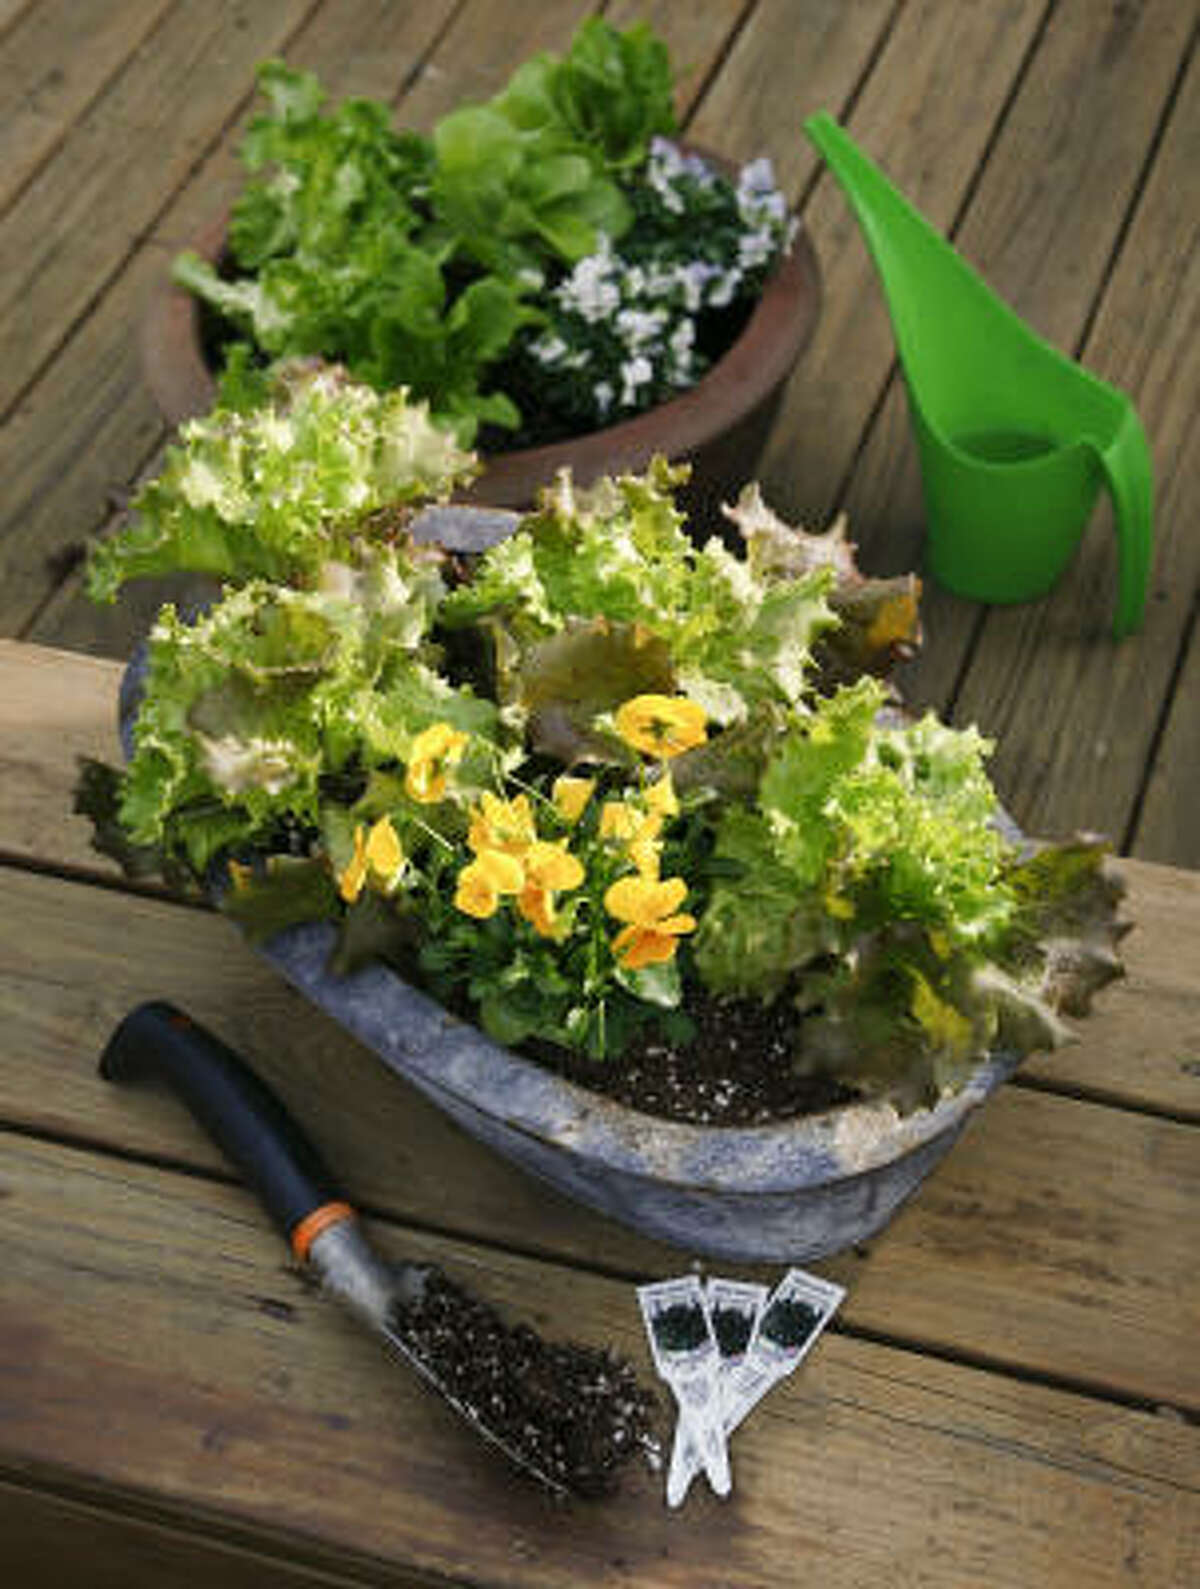 Potted lettuce loves full sun. Mix it with edible ornamentals such as violas.